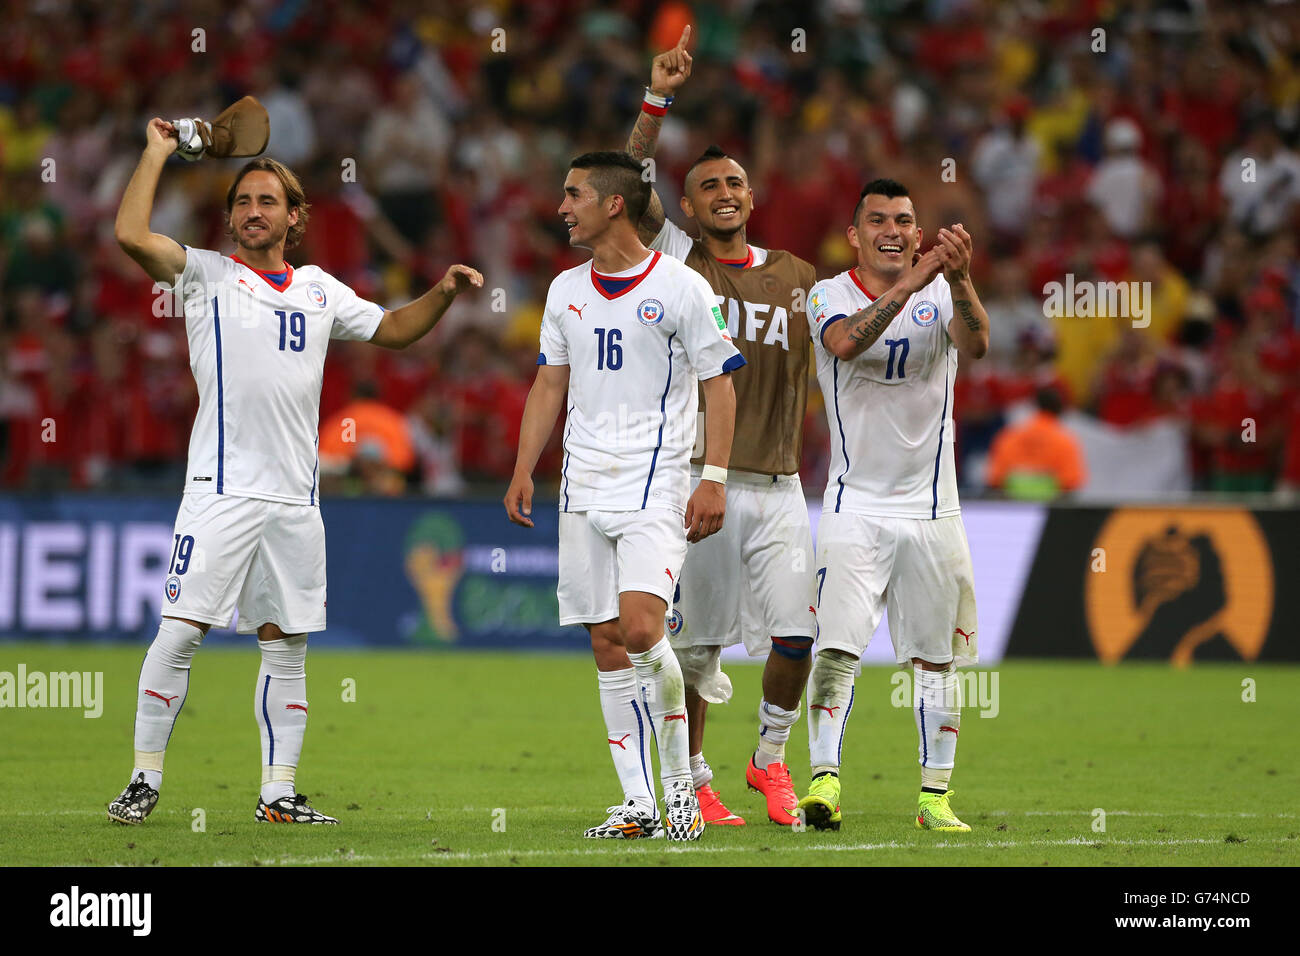 Soccer - FIFA World Cup 2014 - Group B - Spain v Chile - Maracana. Chile's Jose Fuenzalida, Felipe Gutierrez, Arturo Vidal and Gary Medel (left to right) celebrate victory after the final whistle Stock Photo